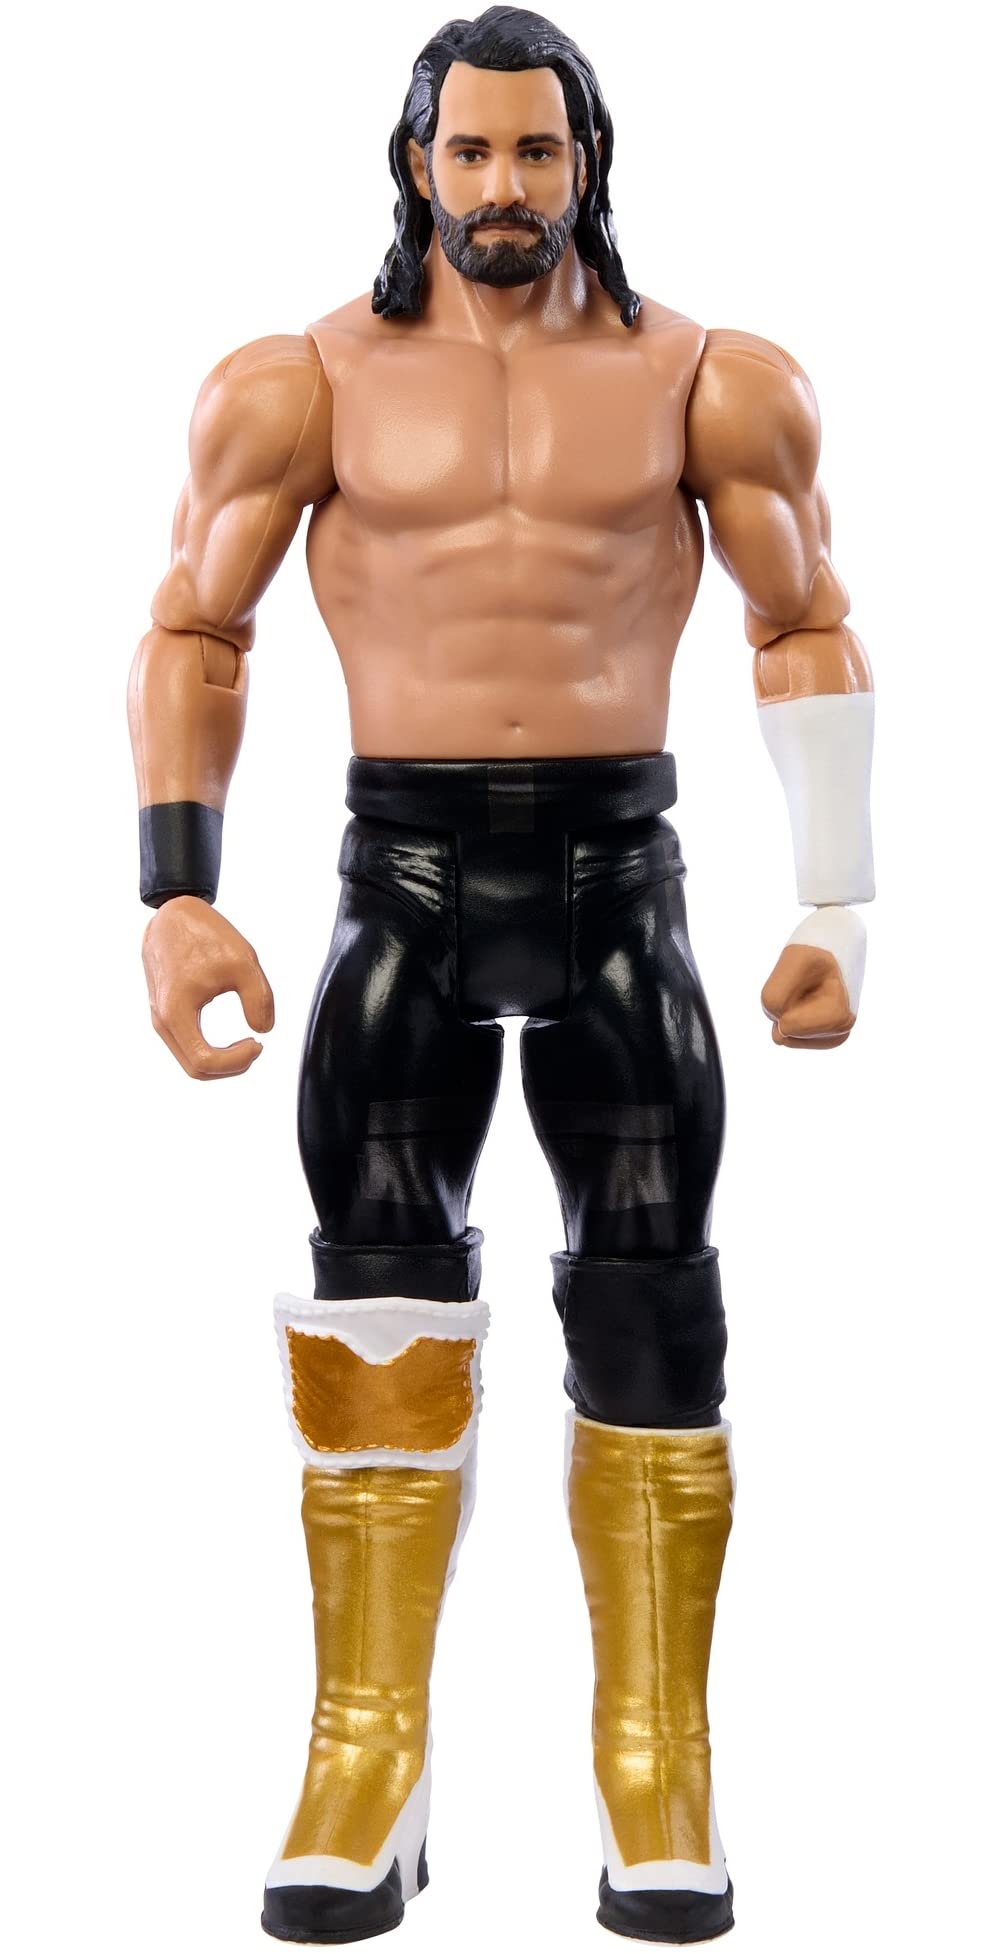 Mattel WWE Seth Rollins Basic Action Figure, 10 Points of Articulation & Life-Like Detail, 6-Inch Collectible